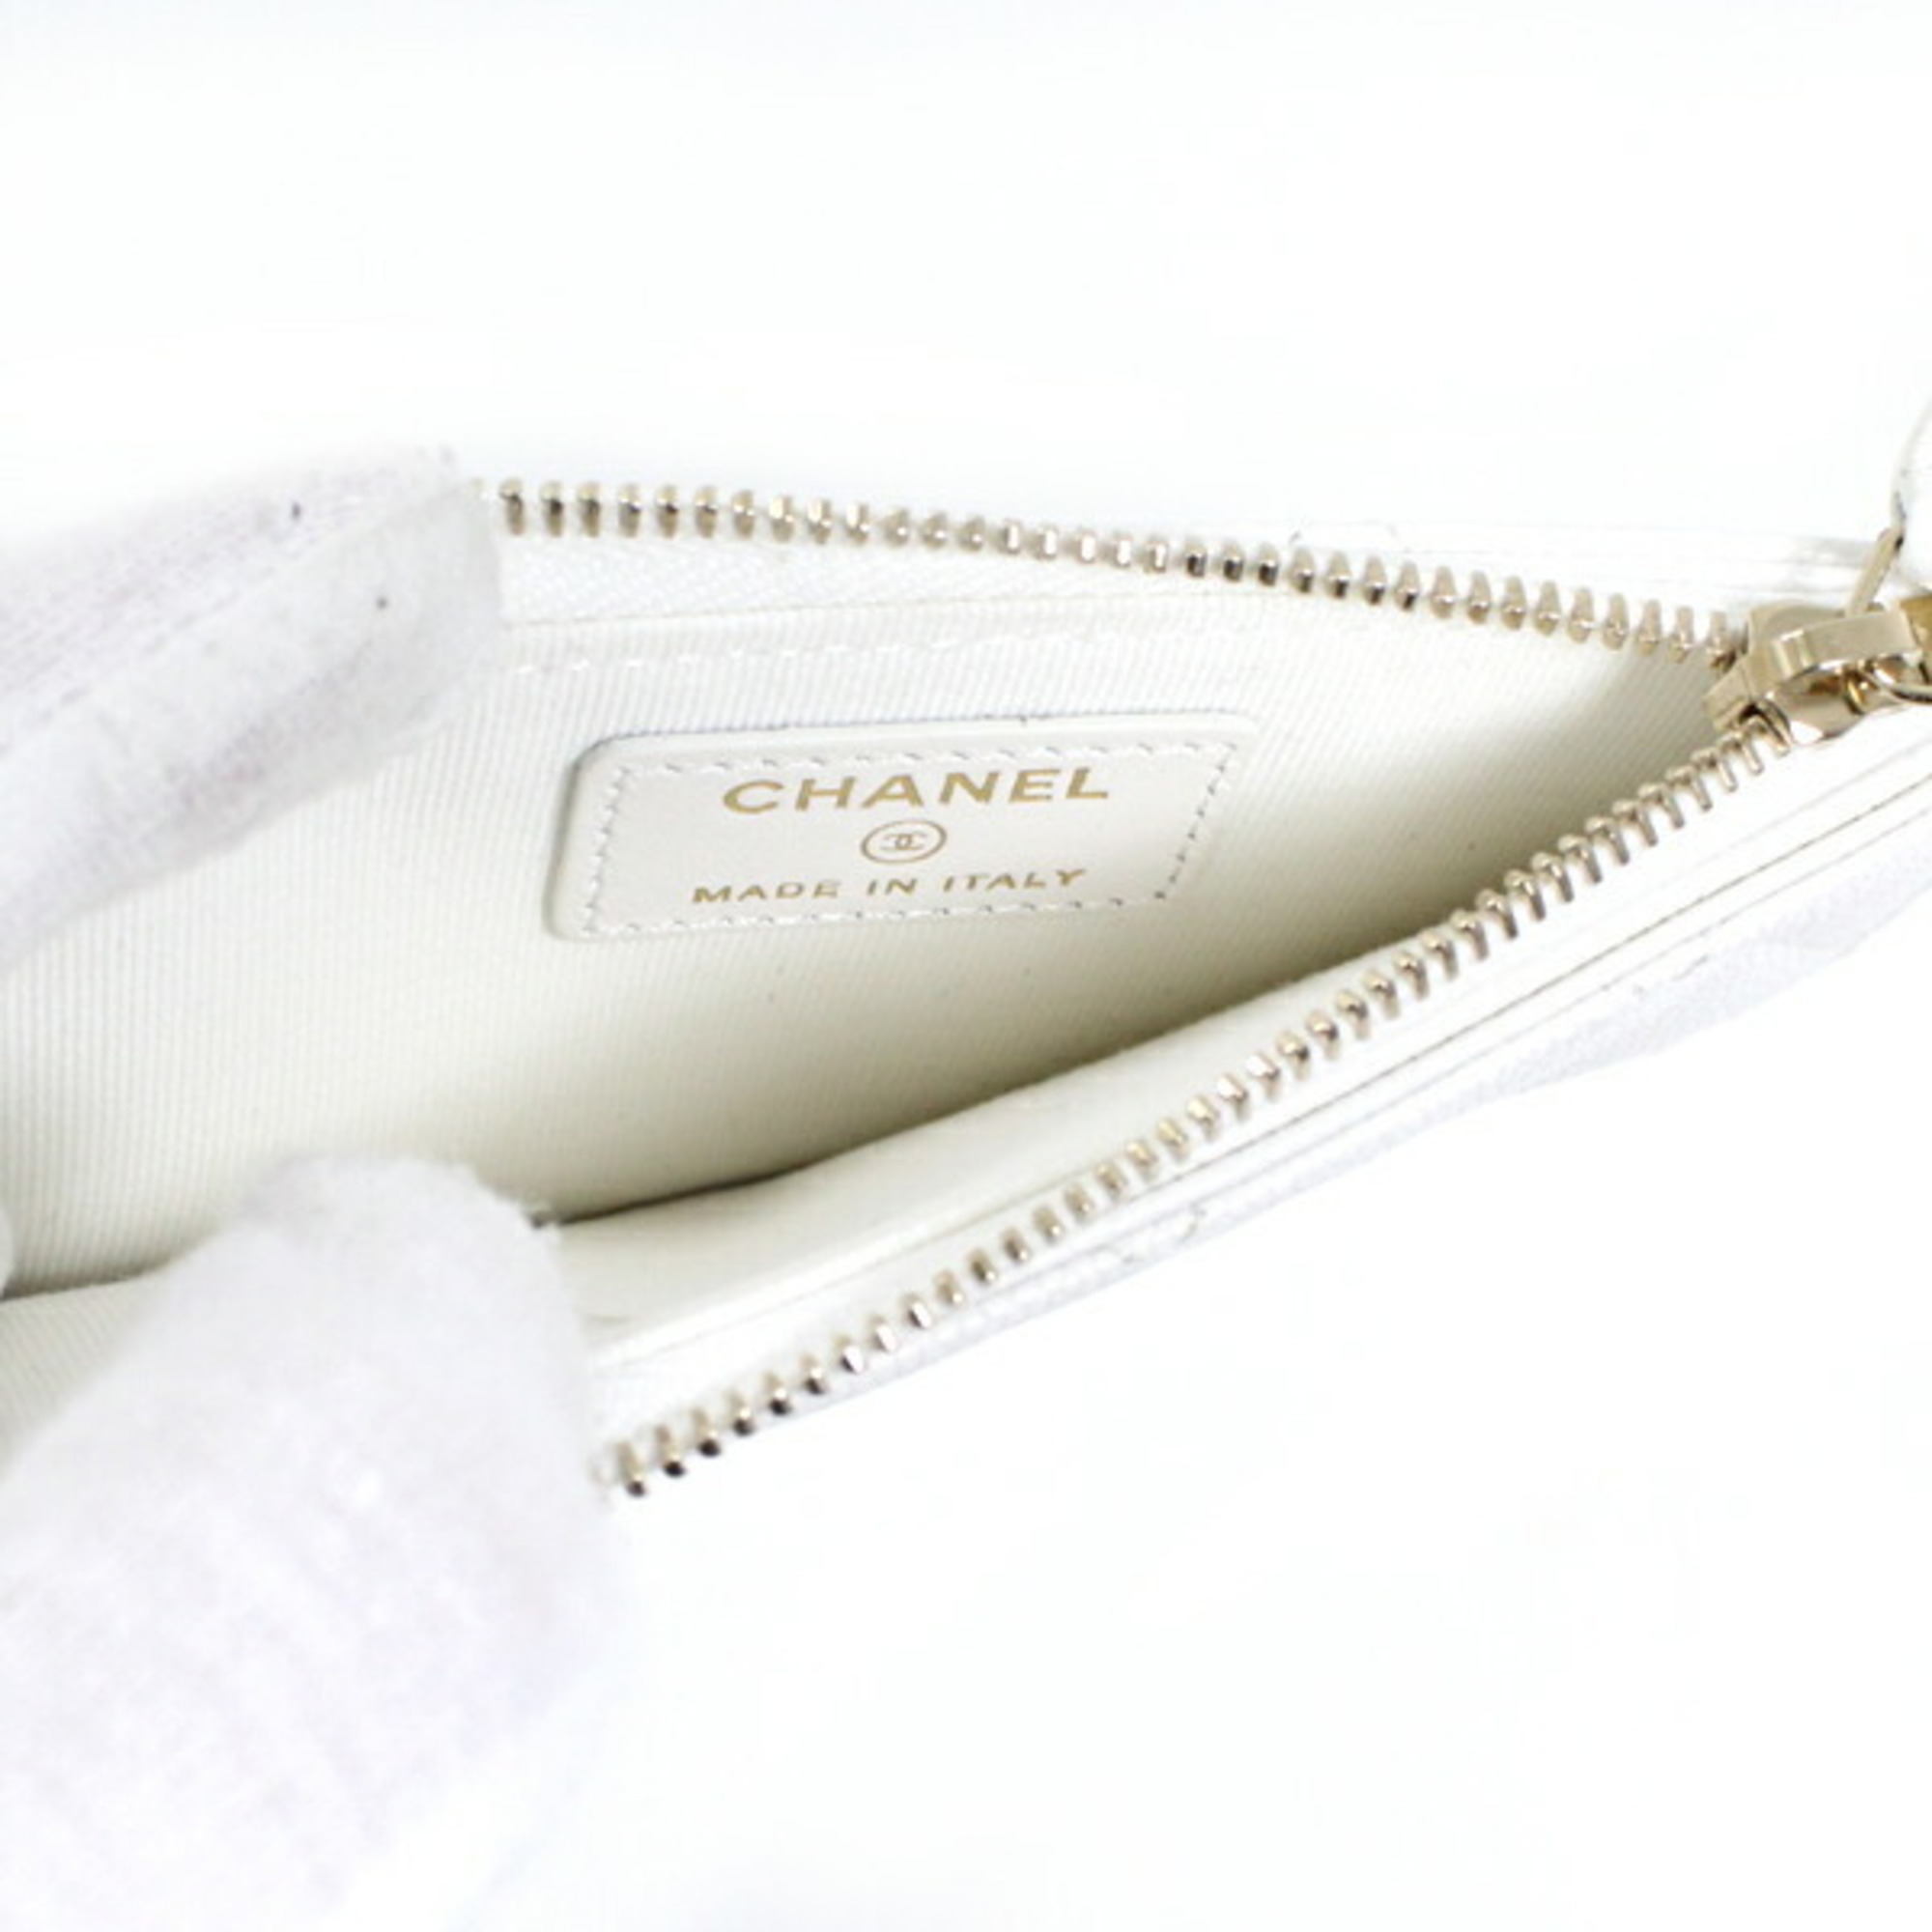 CHANEL Coin Case Card Timeless Classic Line Purse Coco Mark White Ladies Caviar Skin Leather Matelasse Wallet Compact T4160